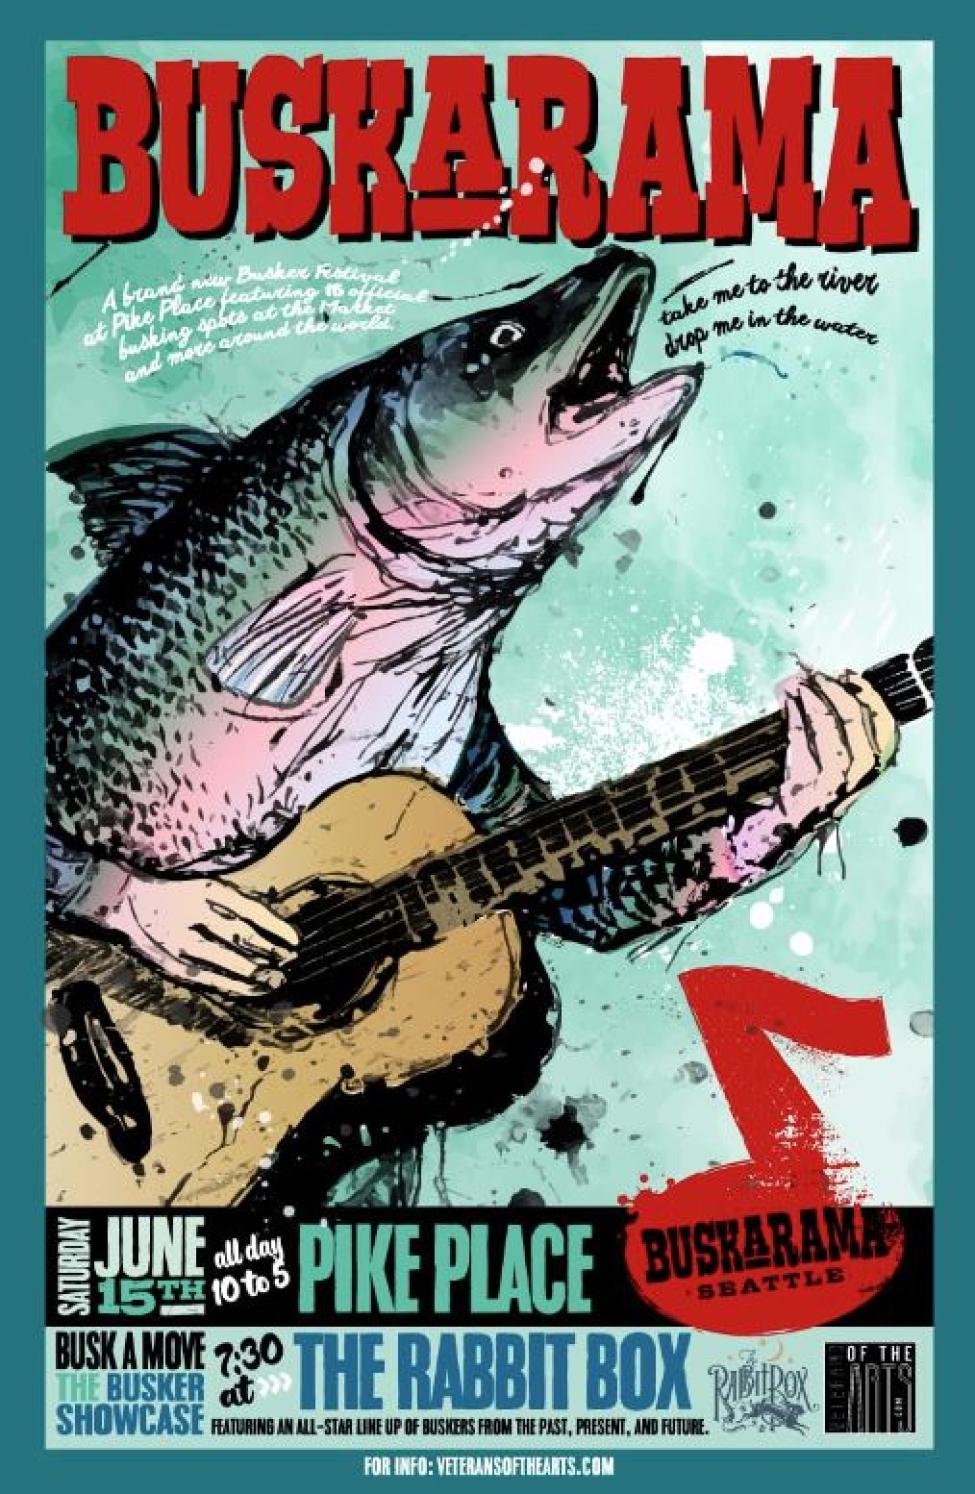 A promotional poster for BUSKARAMA at Pike Place market featuring a fish playing guitar